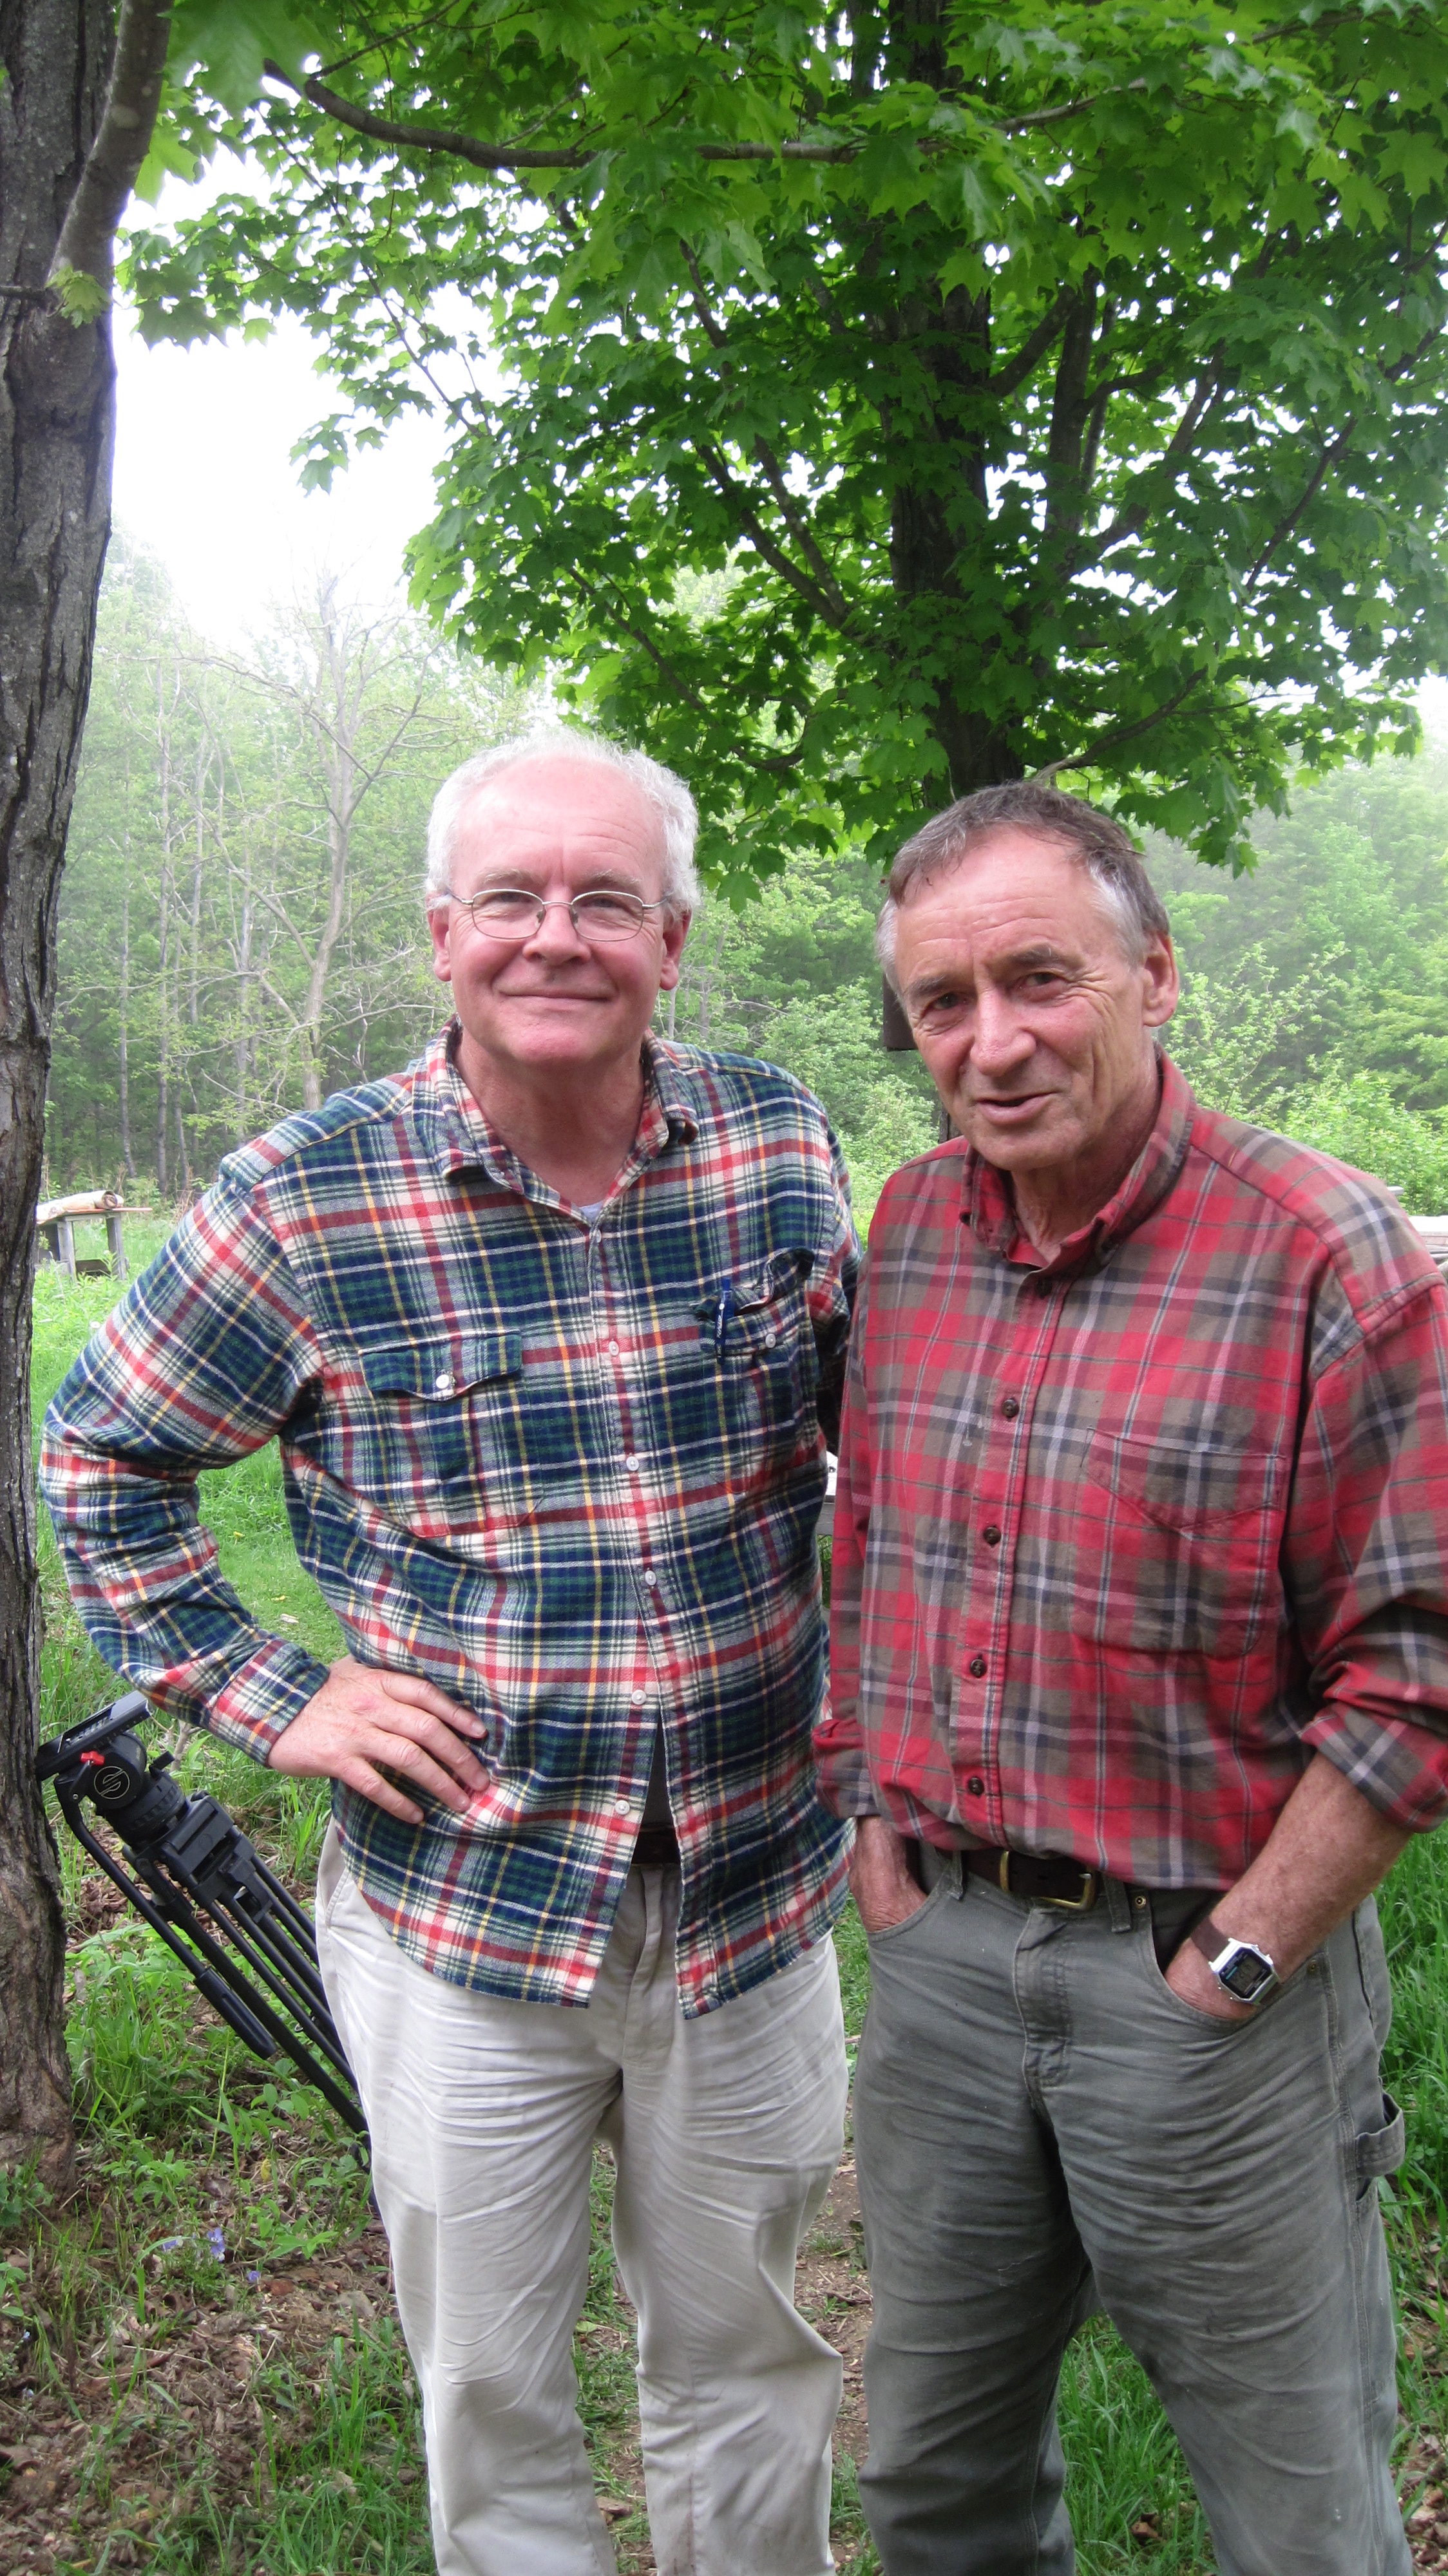 Director Ross Spears with Author Bernd Heinrich during the filming of THE TRUTH ABOUT TREES: A Natural and Human History in 2012.